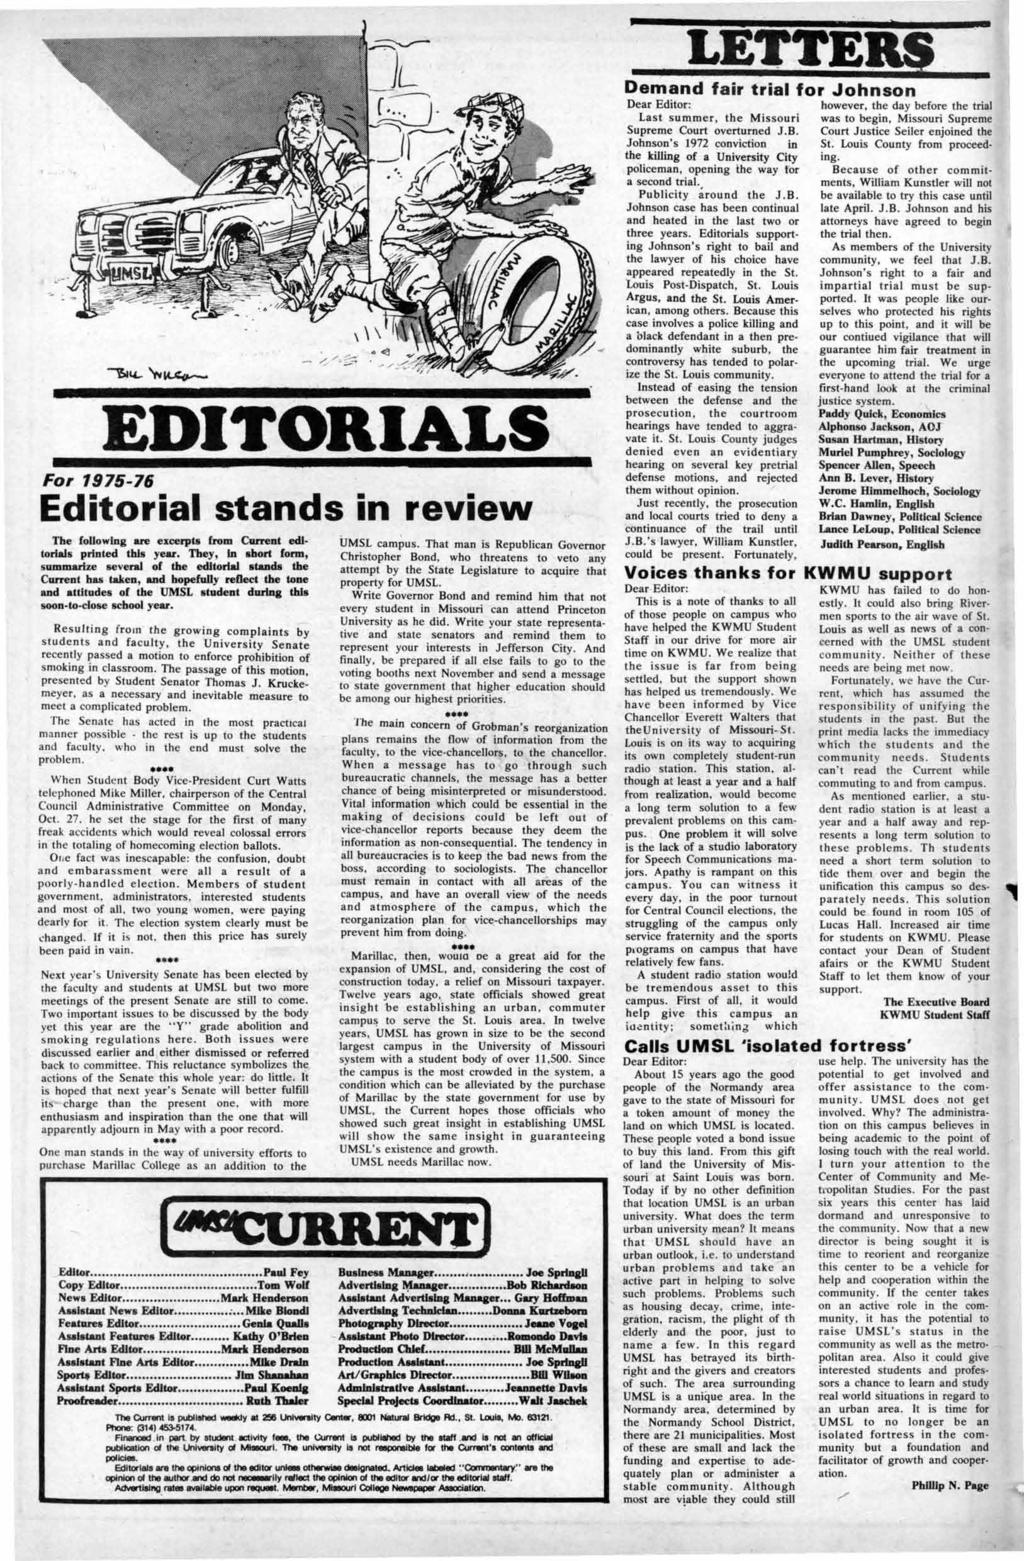 LETTEY EDITORIALS Fo, 197-76 Editorial stands in review The fouowing an excerpts from Current edi torials printed this year.